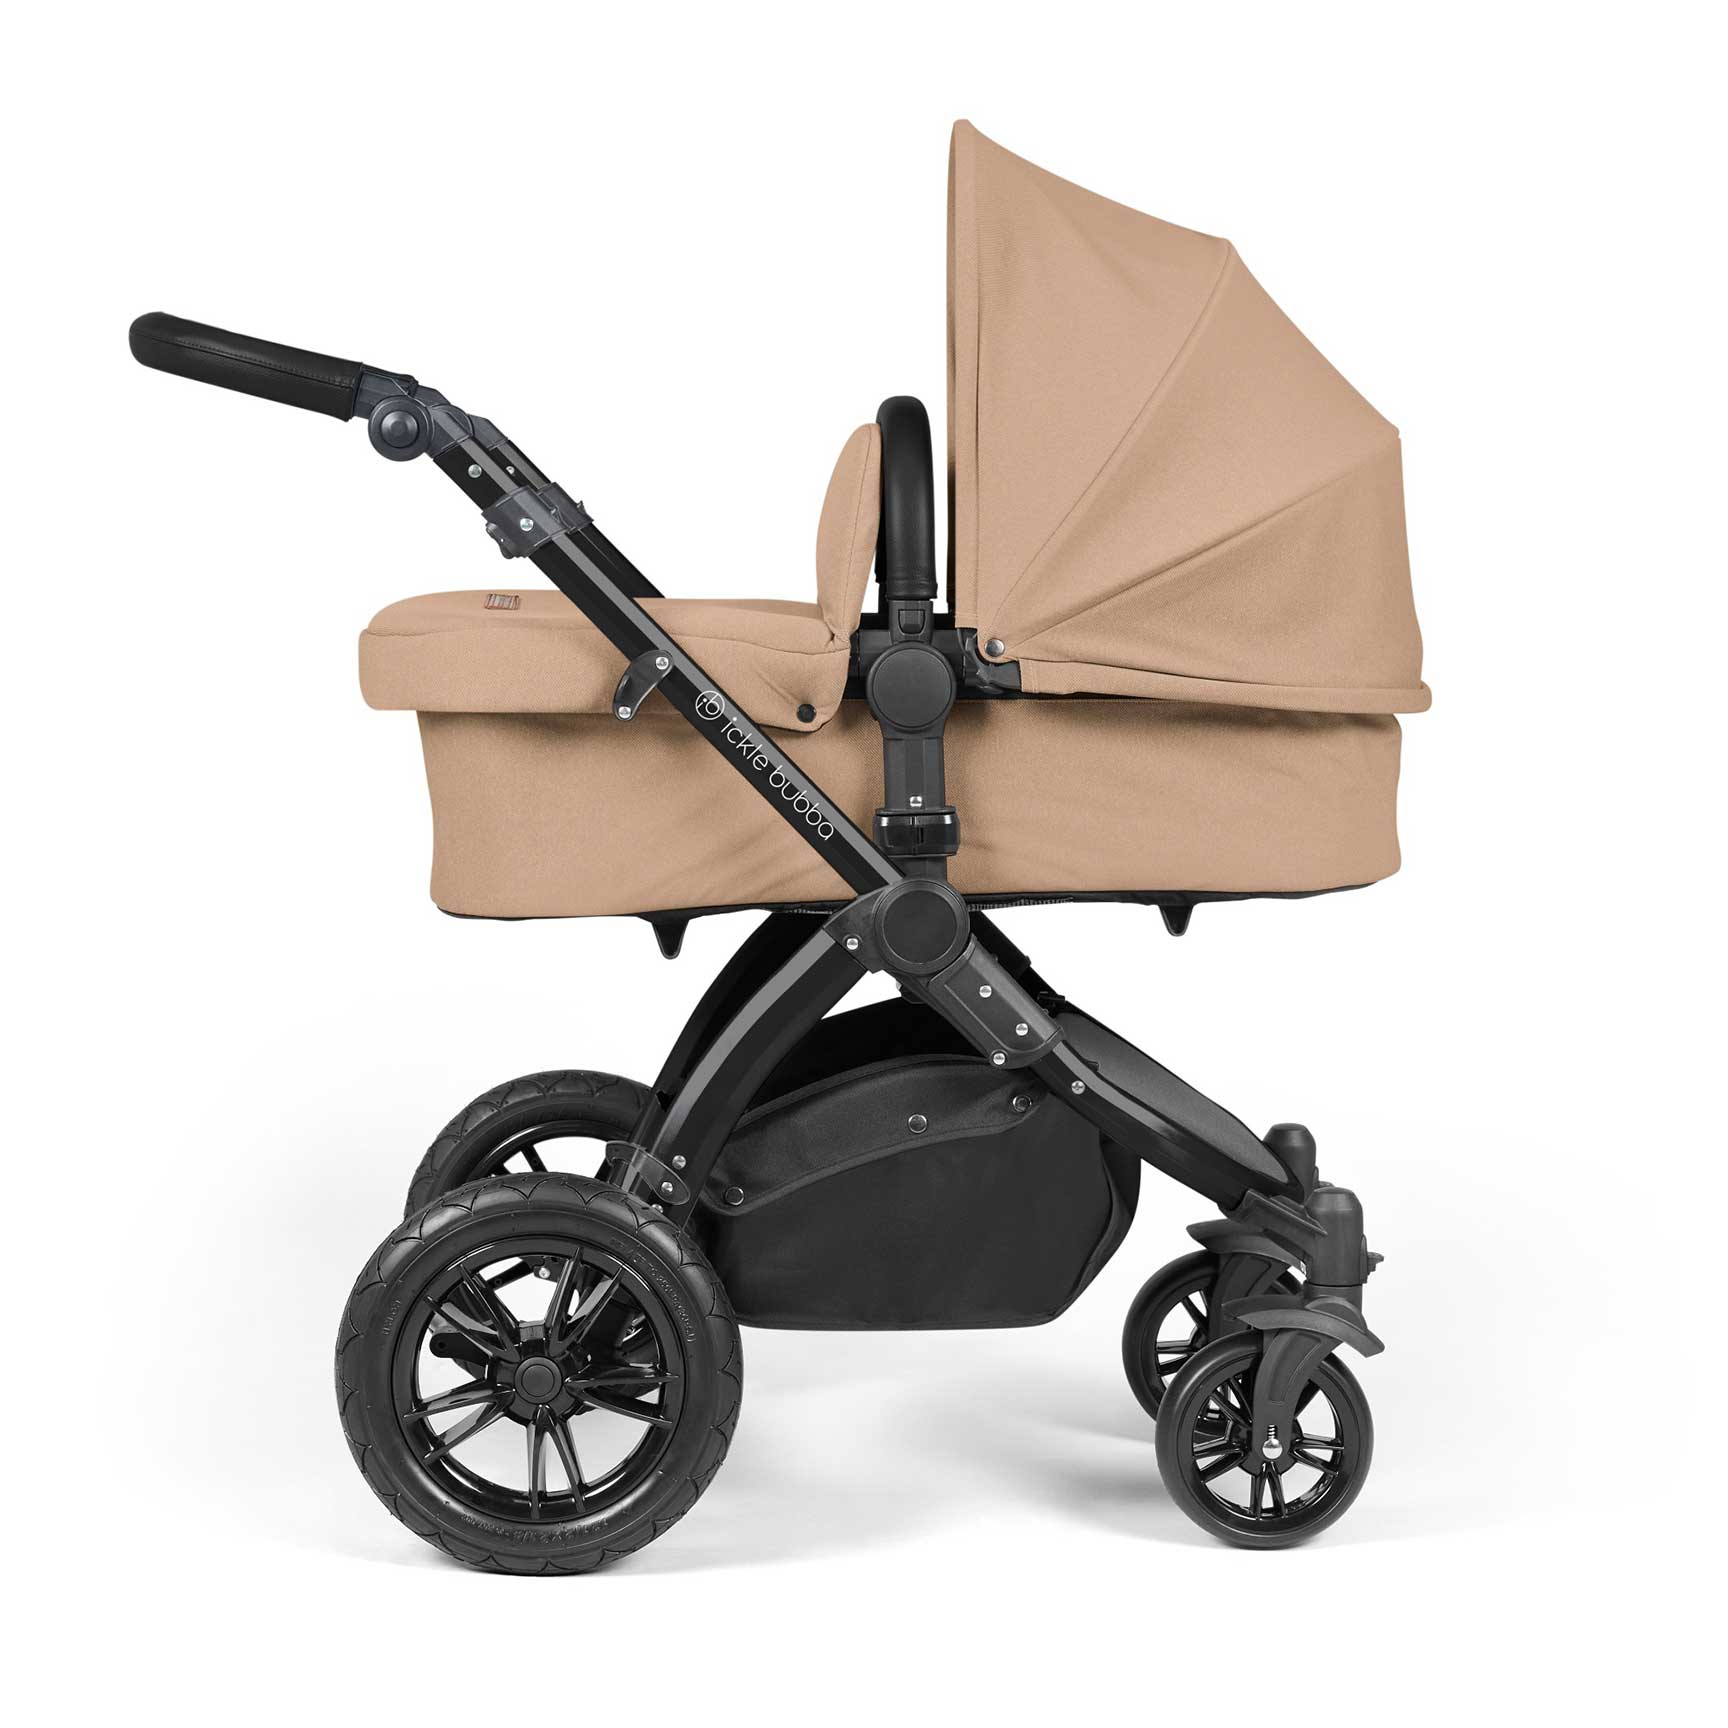 Ickle Bubba travel systems Ickle Bubba Stomp Luxe 2 in 1 Plus Pushchair & Carrycot - Black/Desert/Black 10-003-001-208